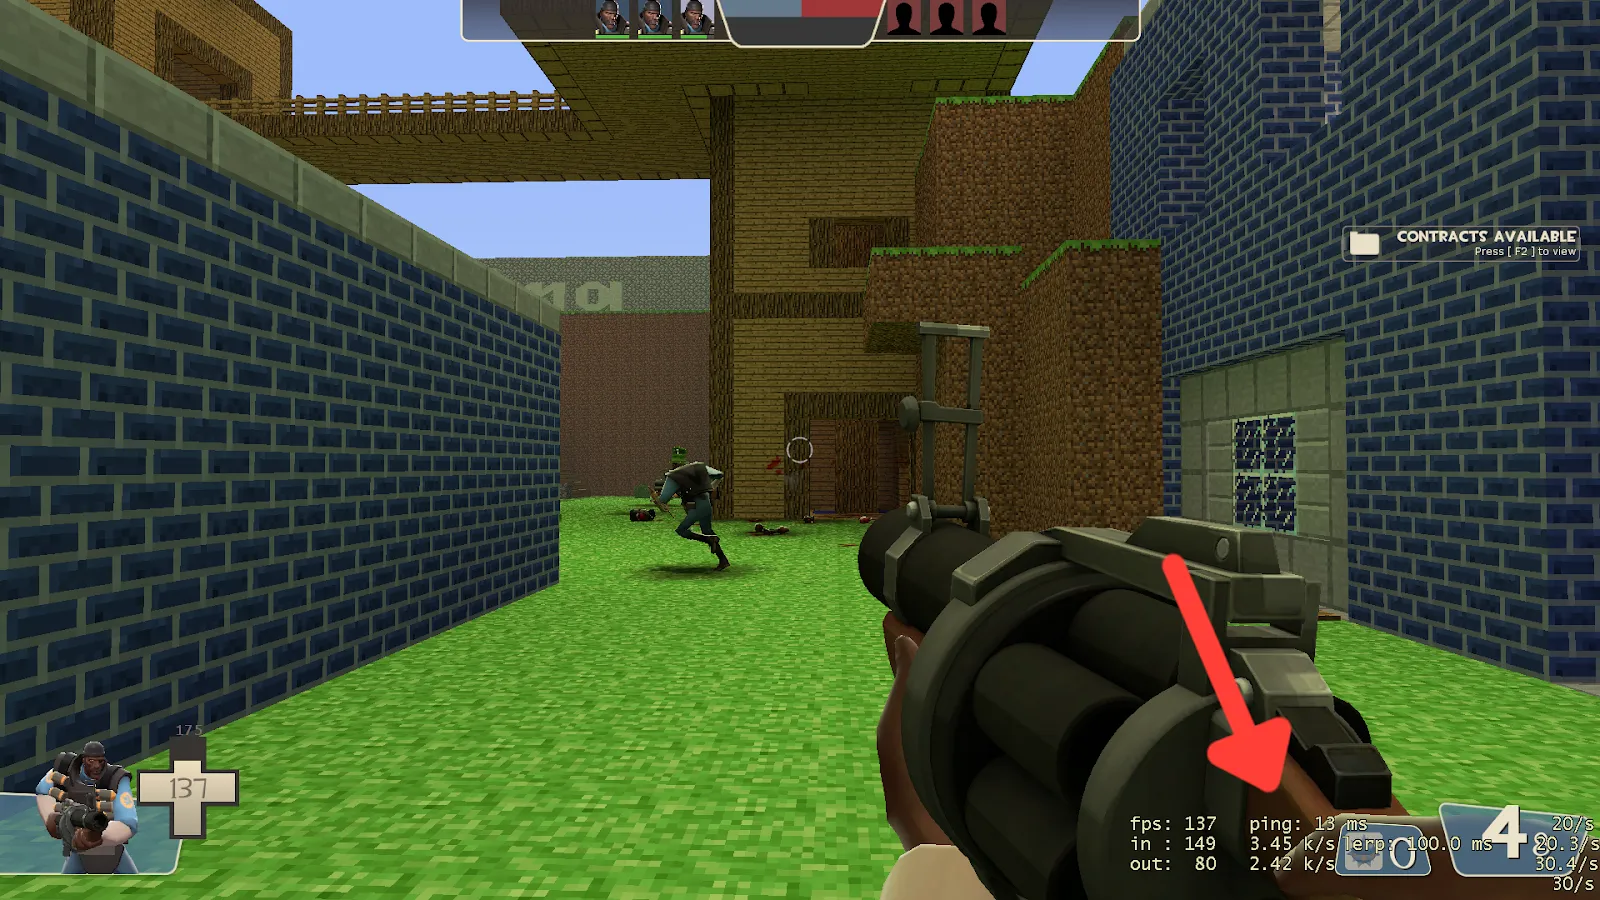 Show Ping in Team Fortress 2 demonstration image